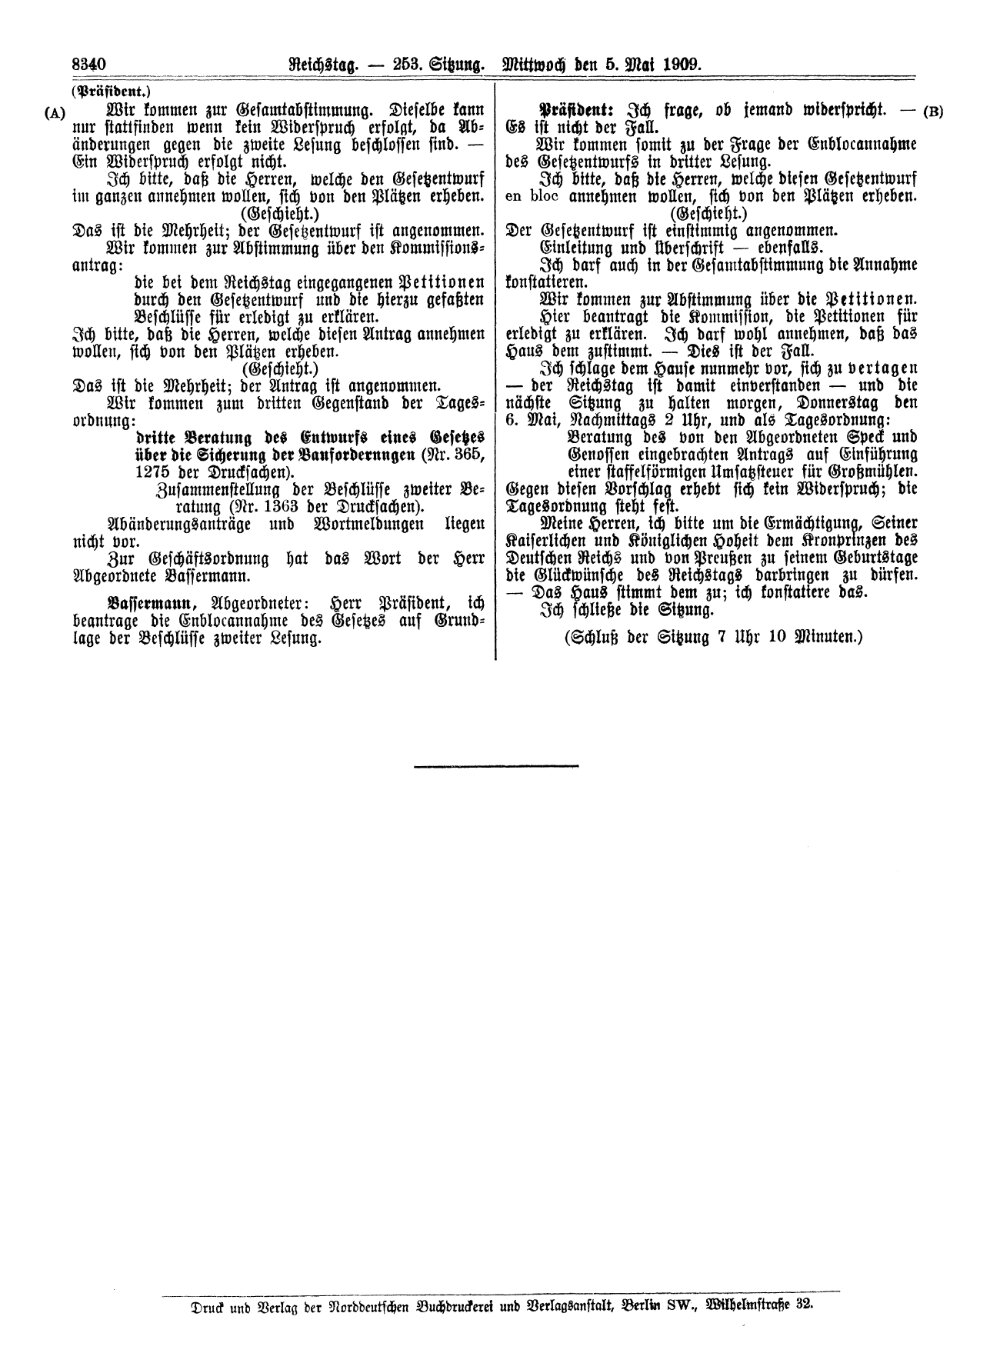 Scan of page 8340